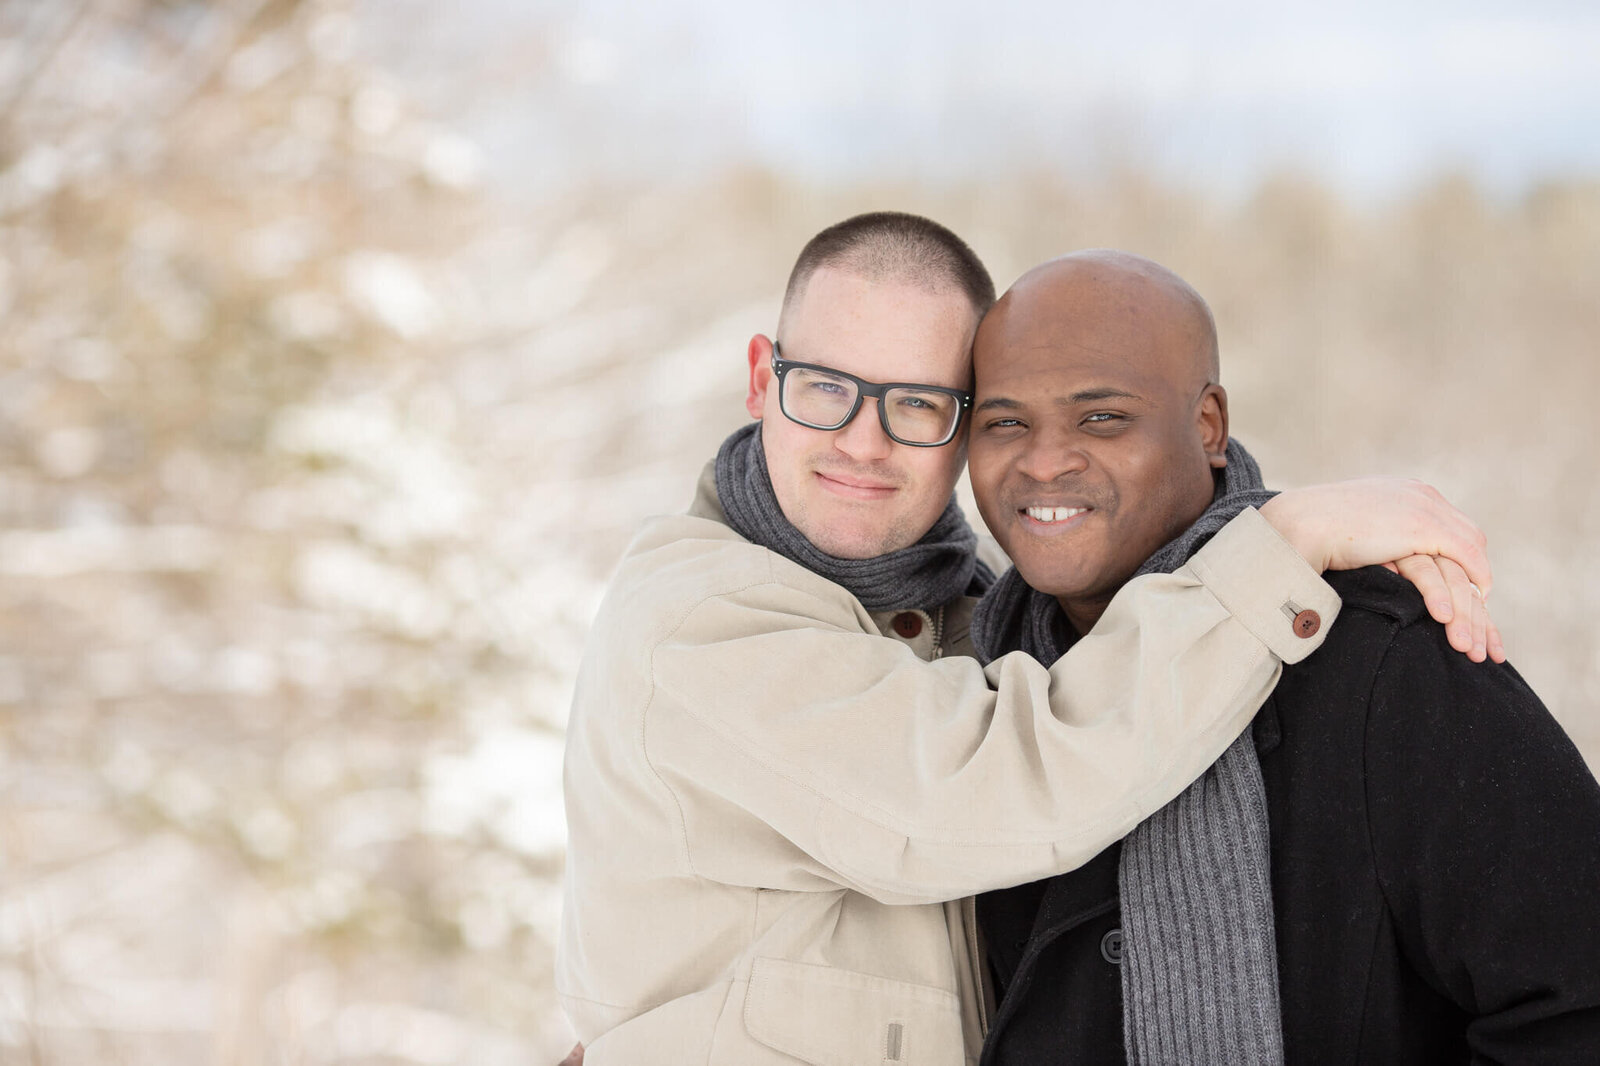 Two males in LGBT relationship hugging facing camera wearing winter coats and scarves